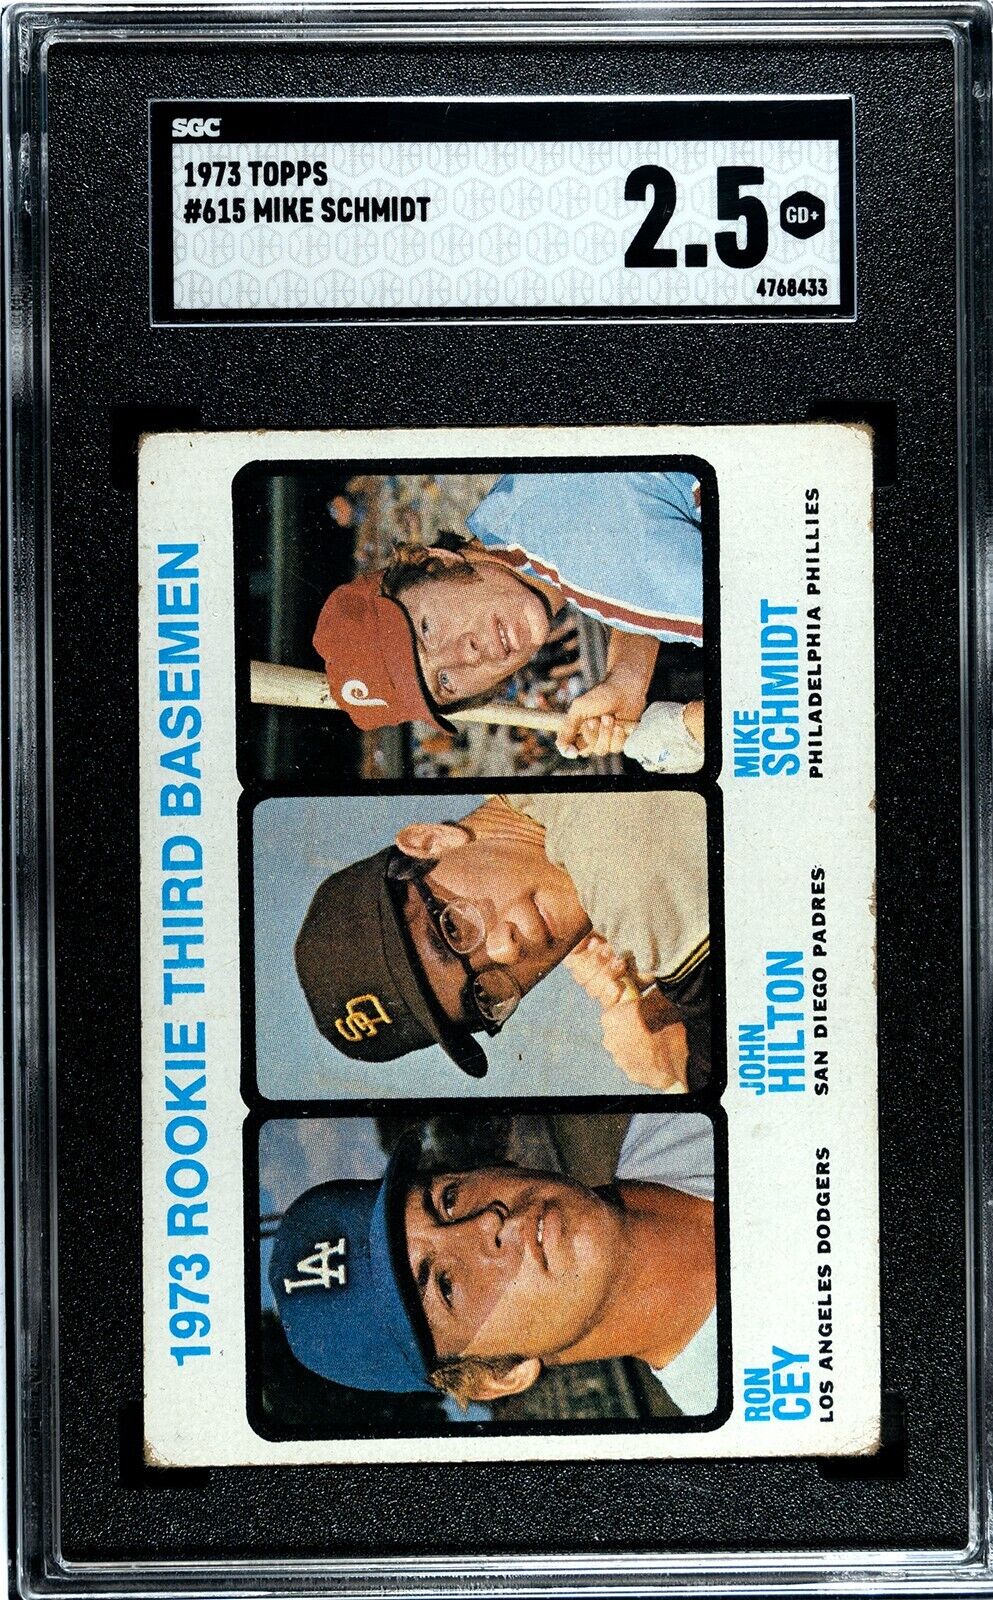 1973 Topps #615 Mike Schmidt Rookie RC Graded SGC 2.5 GD+ Free Shipping!